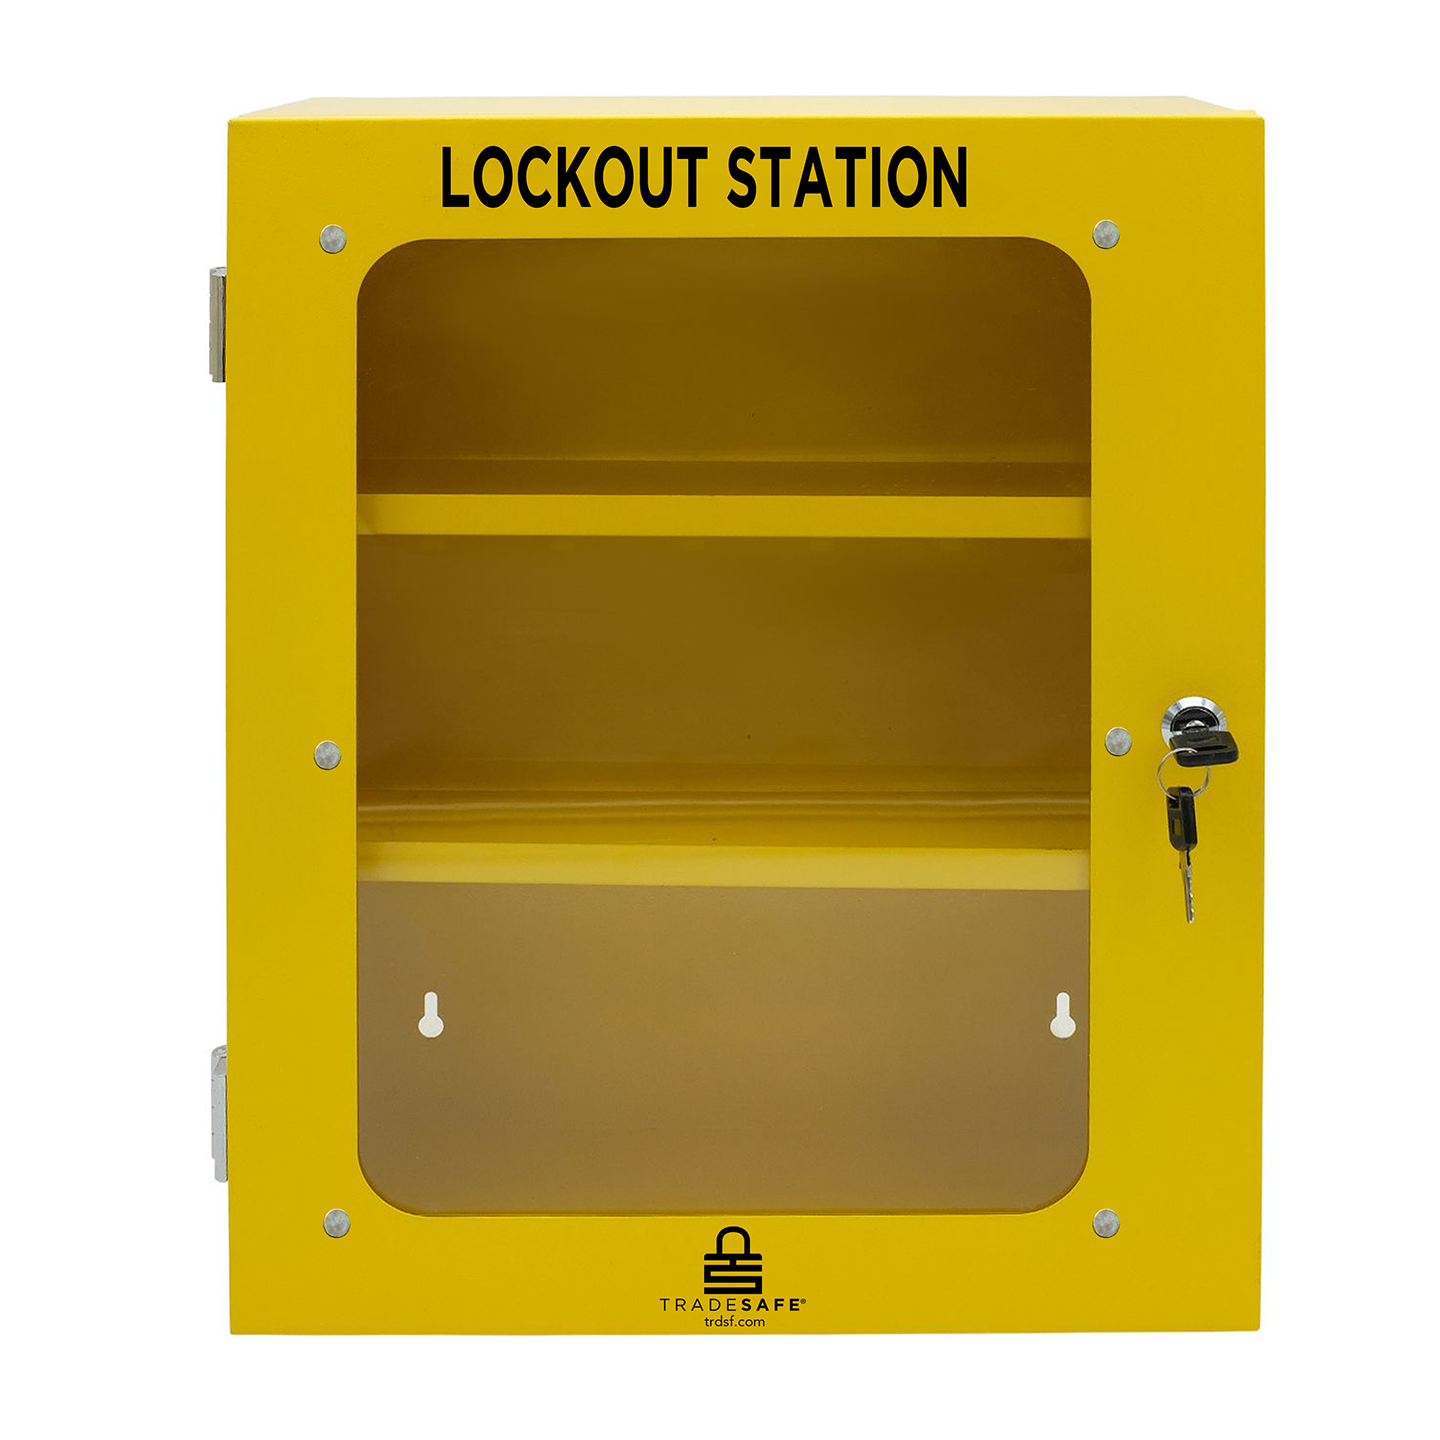 eye-level view of a closed yellow steel lockout station cabinet